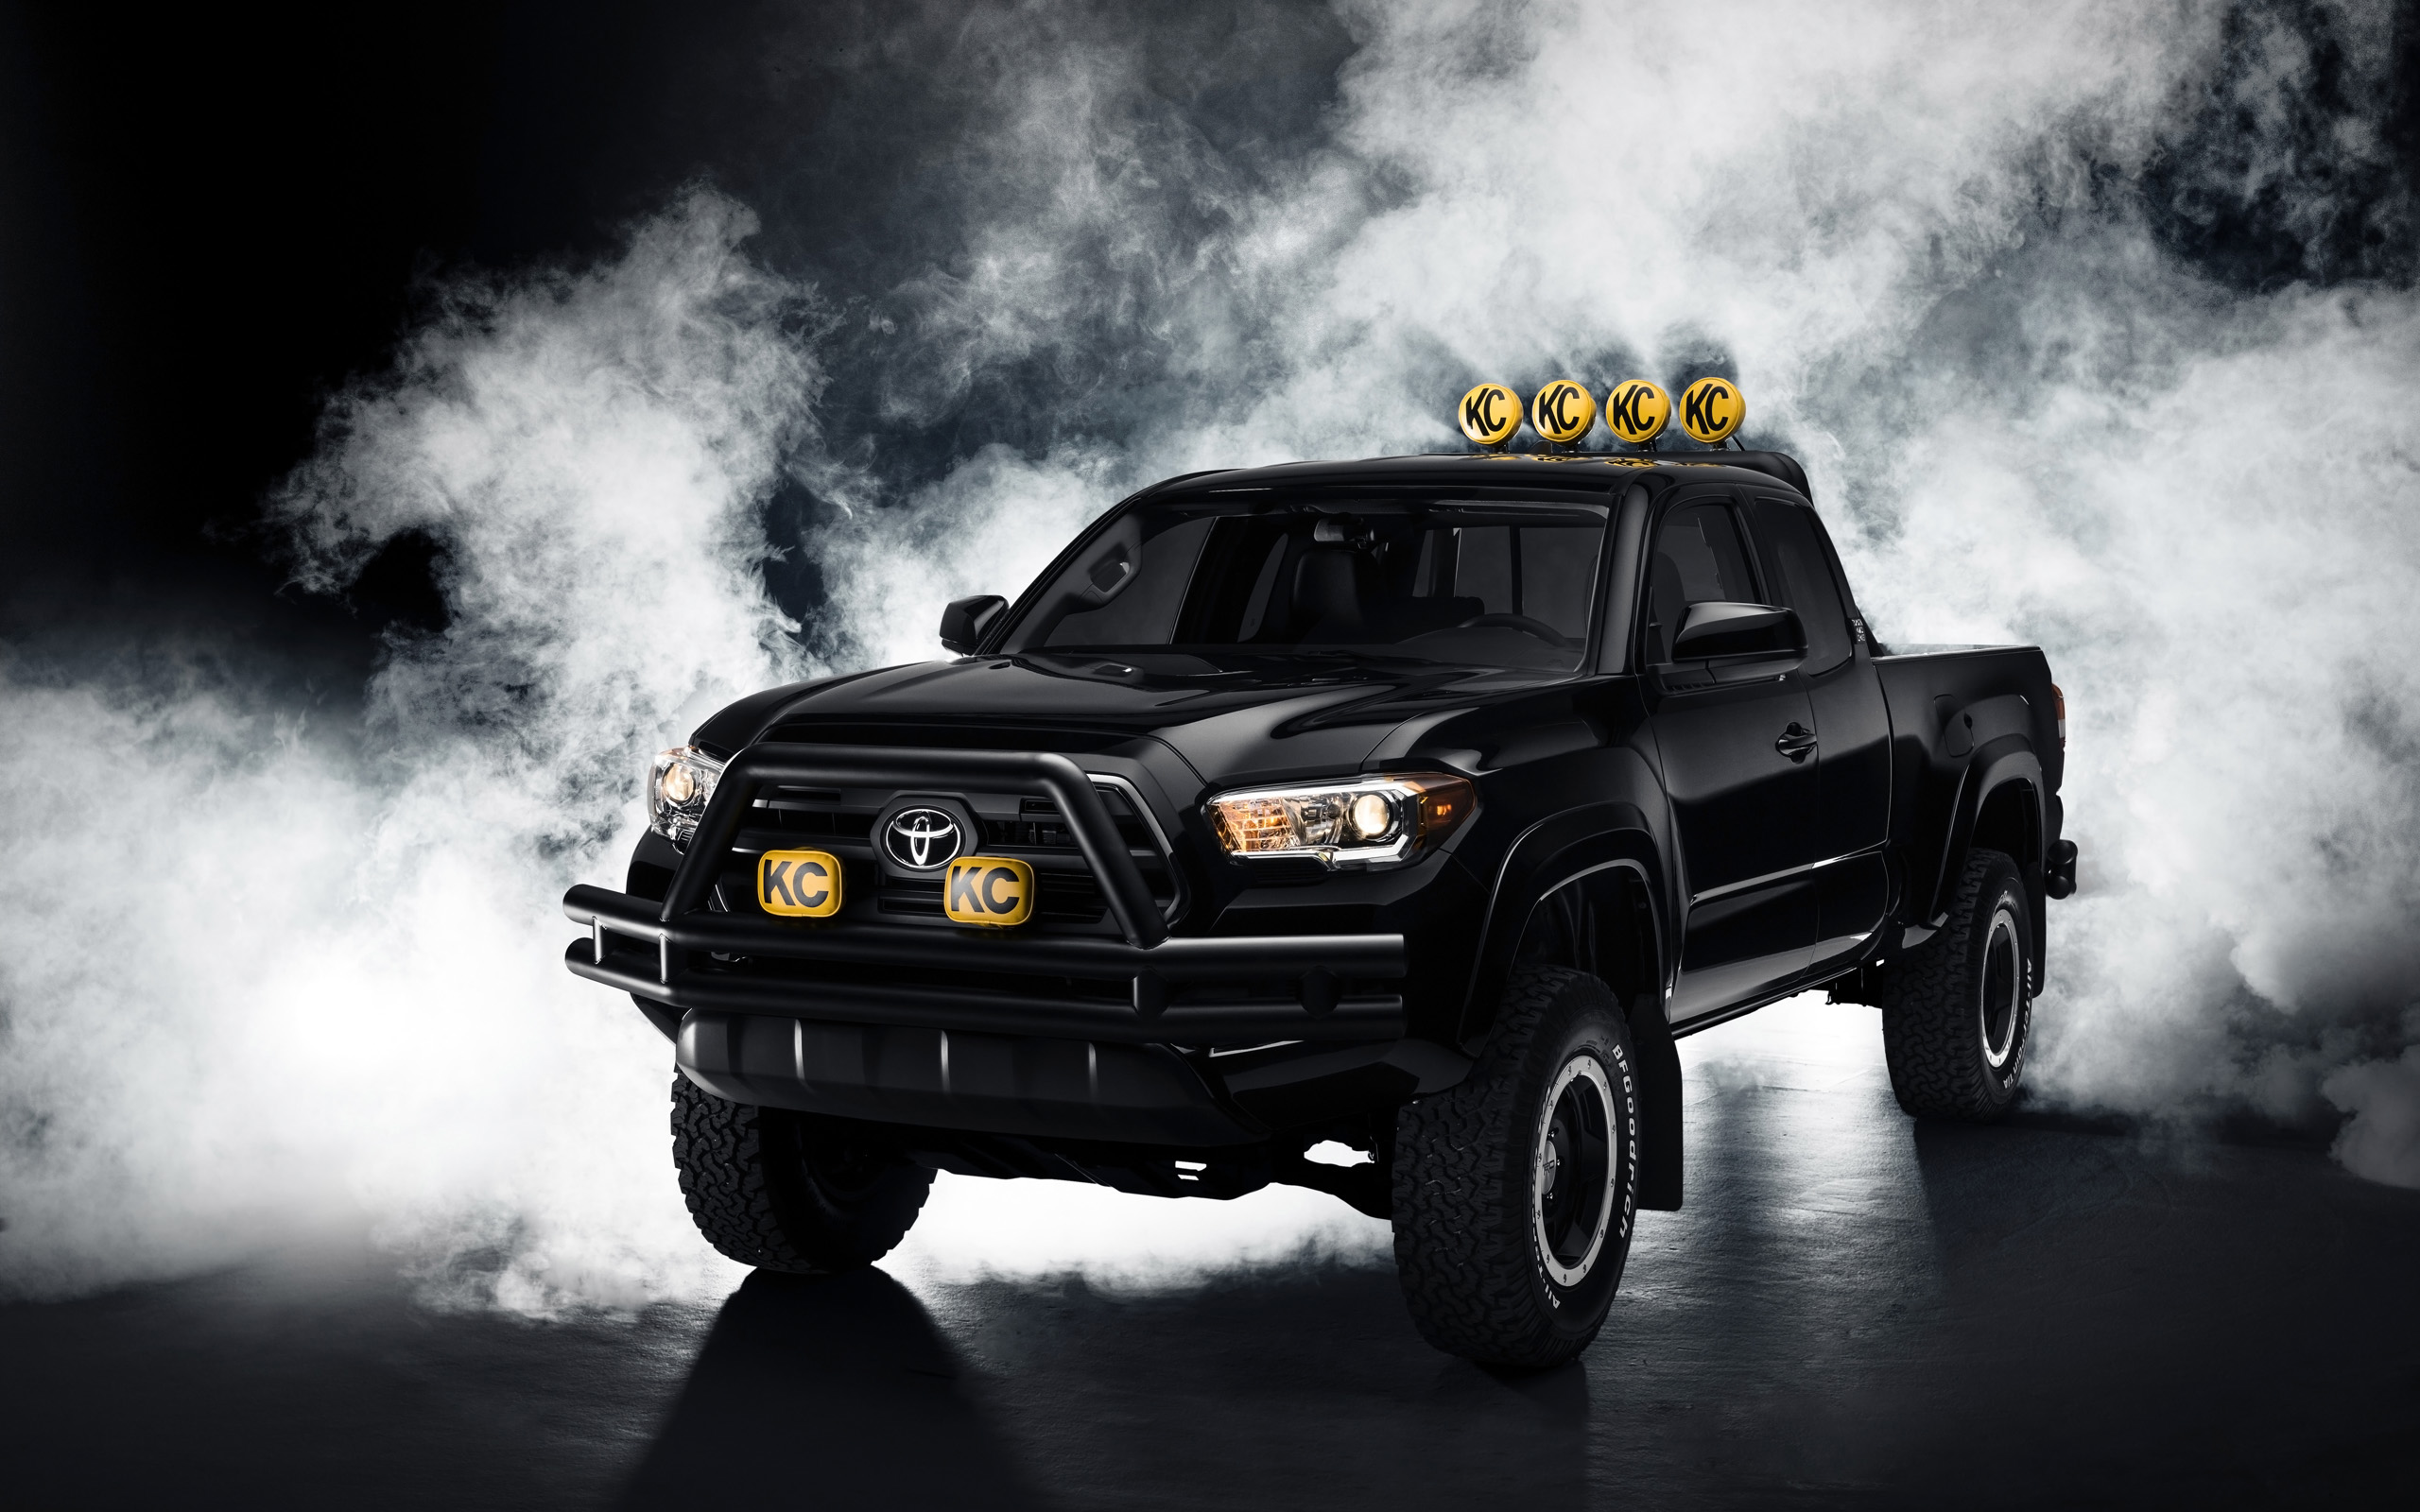 2016 Toyota Tacoma Back to the Future Wallpaper HD Car Wallpapers